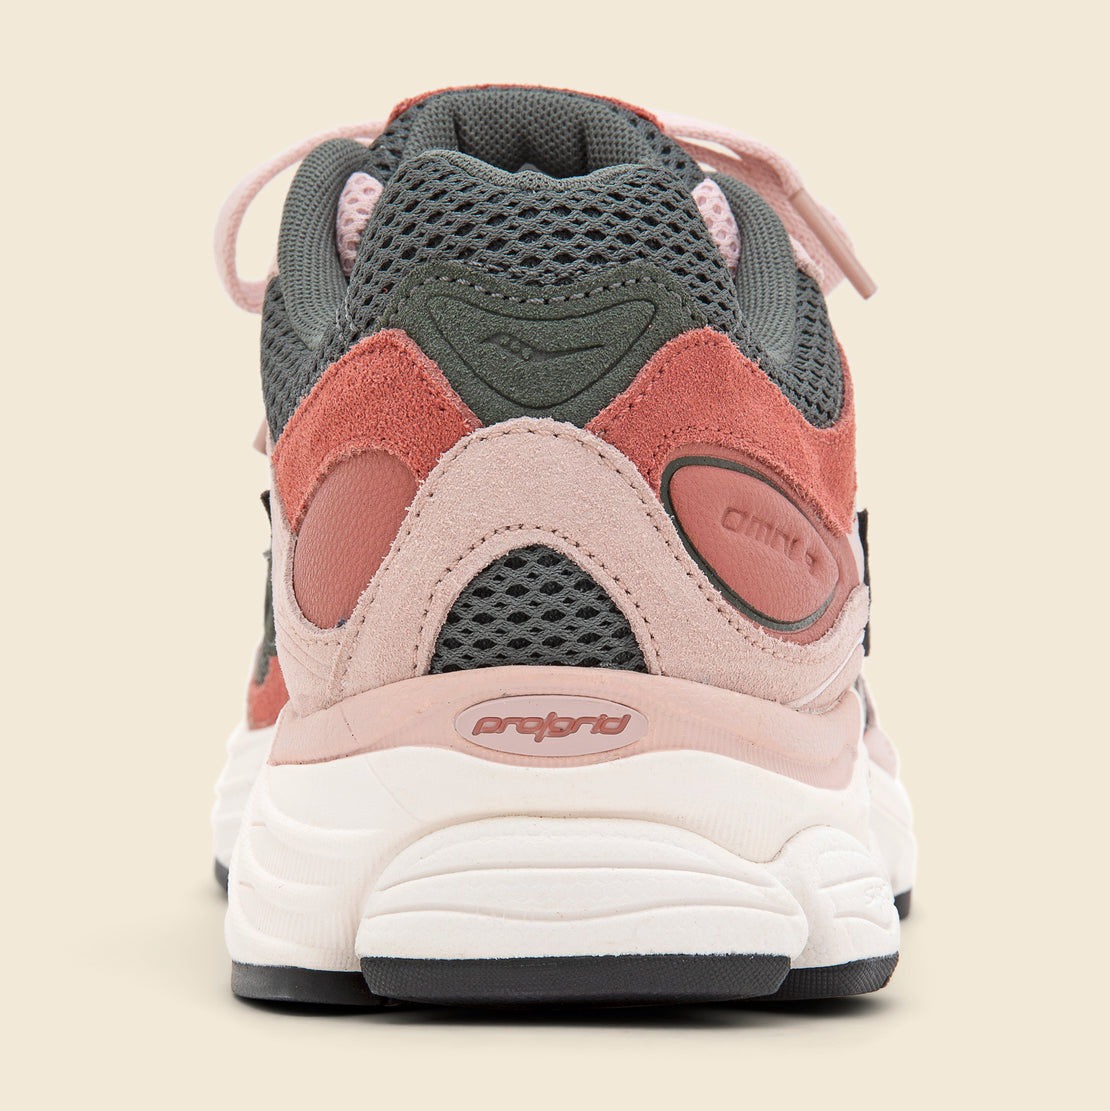 Progrid Omni 9 Sneaker - Pink/Charcoal - Saucony - STAG Provisions - Shoes - Athletic